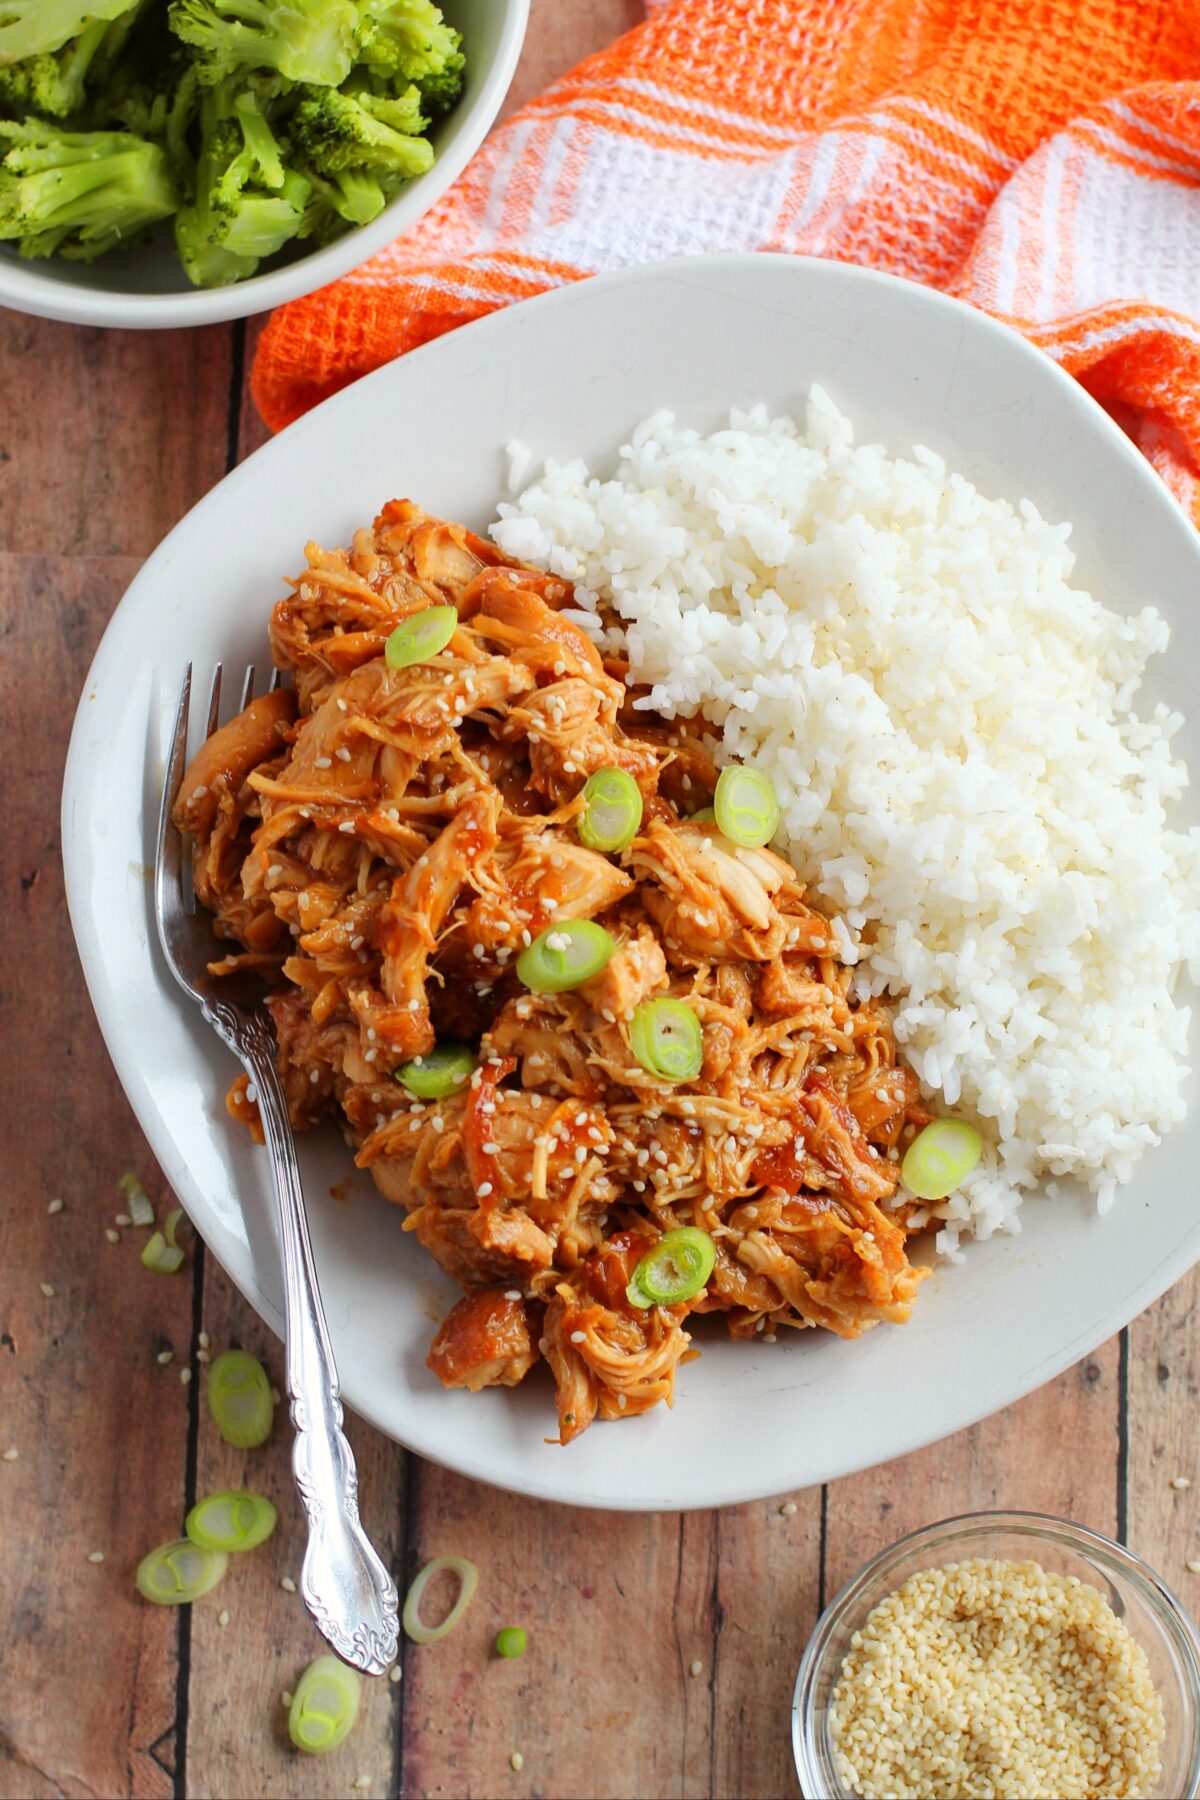 This slow cooker chicken teriyaki is an easy weeknight meal to throw together in the morning, for a tasty dinner ready at the end of the day.